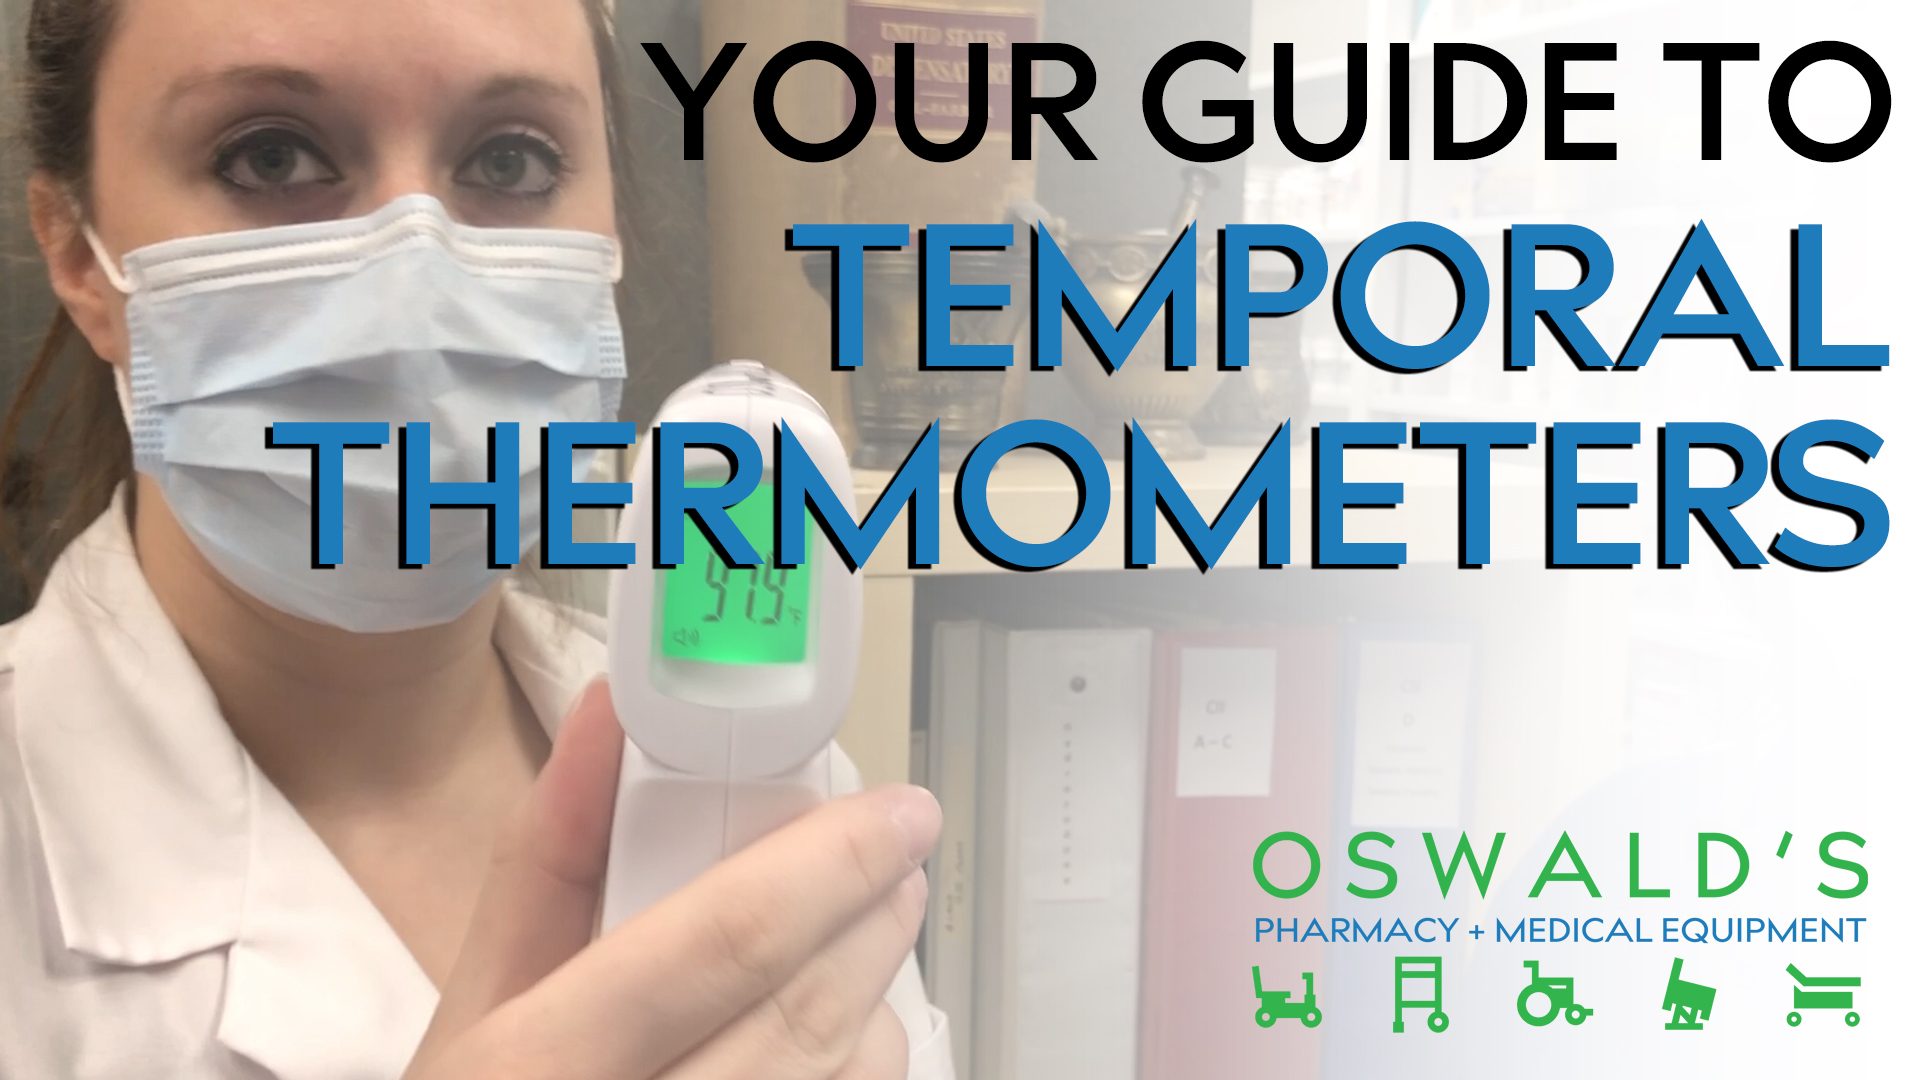 What thermometer placement is more accurate?